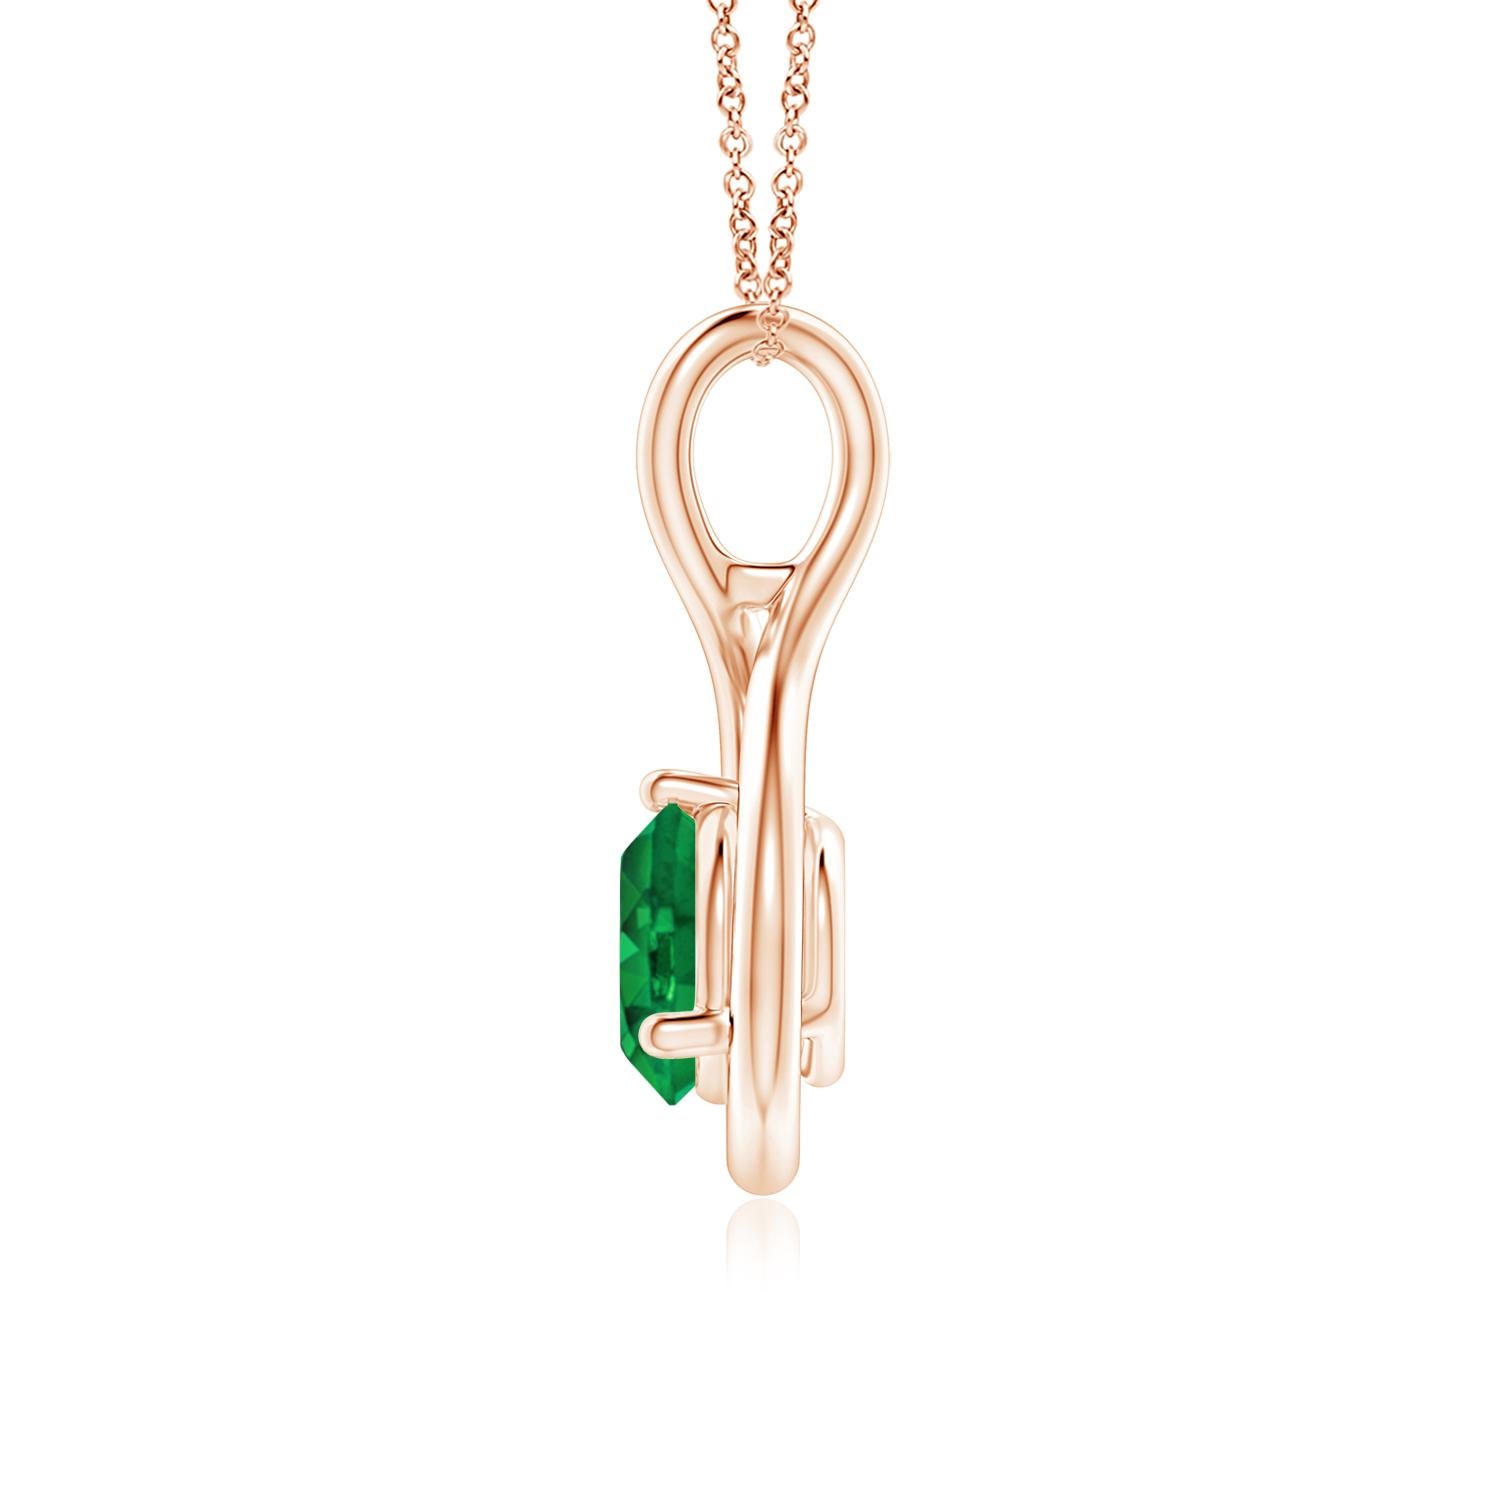 Nestled within a graceful infinity loop is a prong-set solitaire emerald that draws the eye with its lush green hue. The fluid elegance of this lustrous 14k rose gold infinity twist pendant evokes a feminine vibe.
Emerald is the Birthstone for May